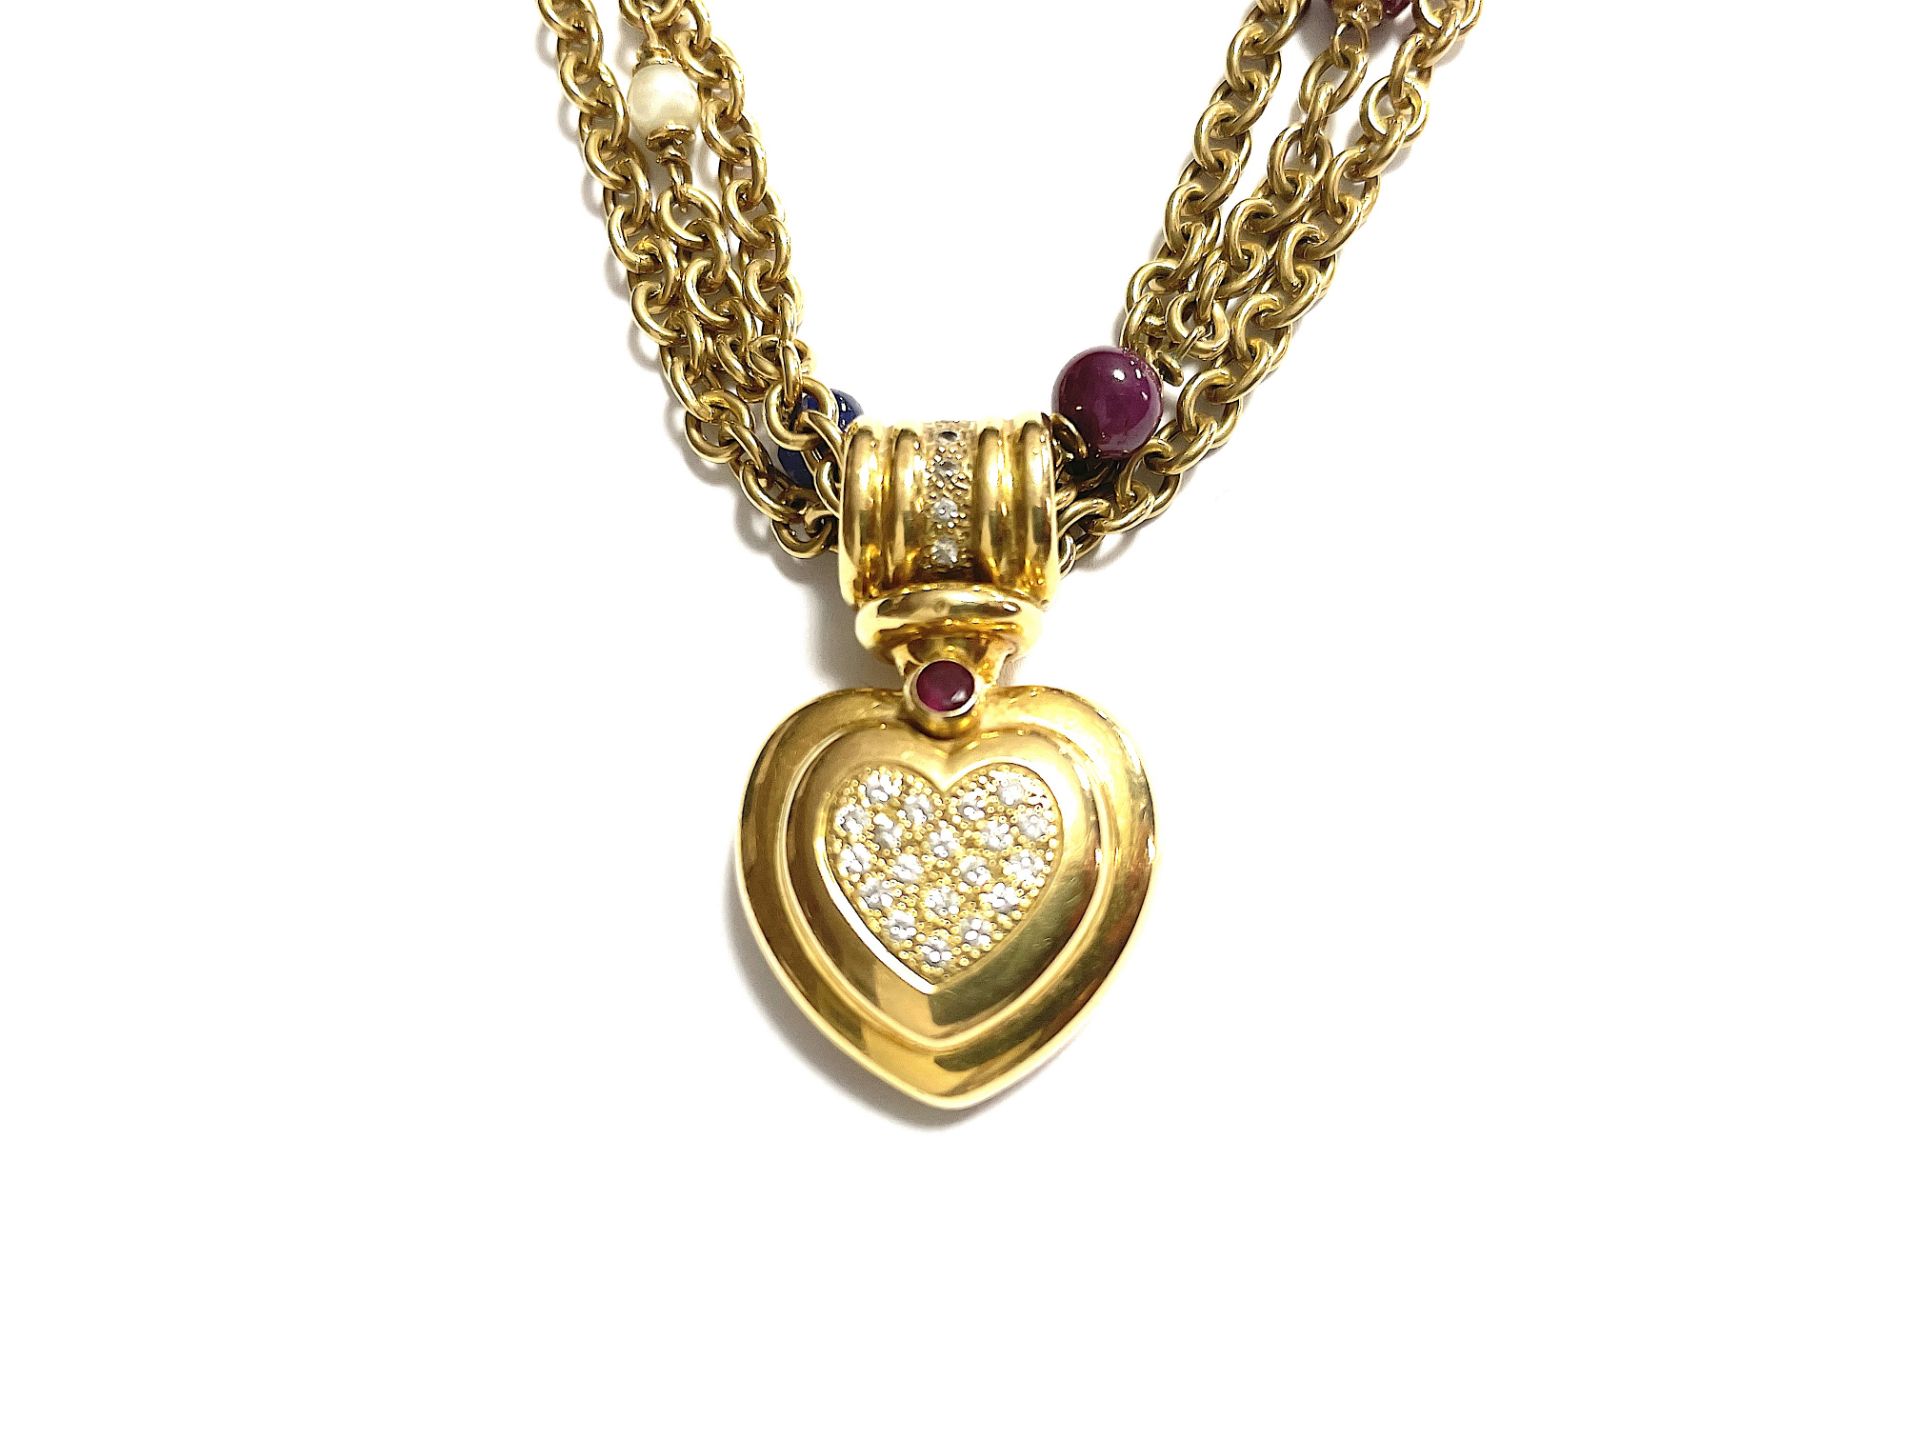 3 strands gemstone necklace with diamond heart - Image 3 of 6